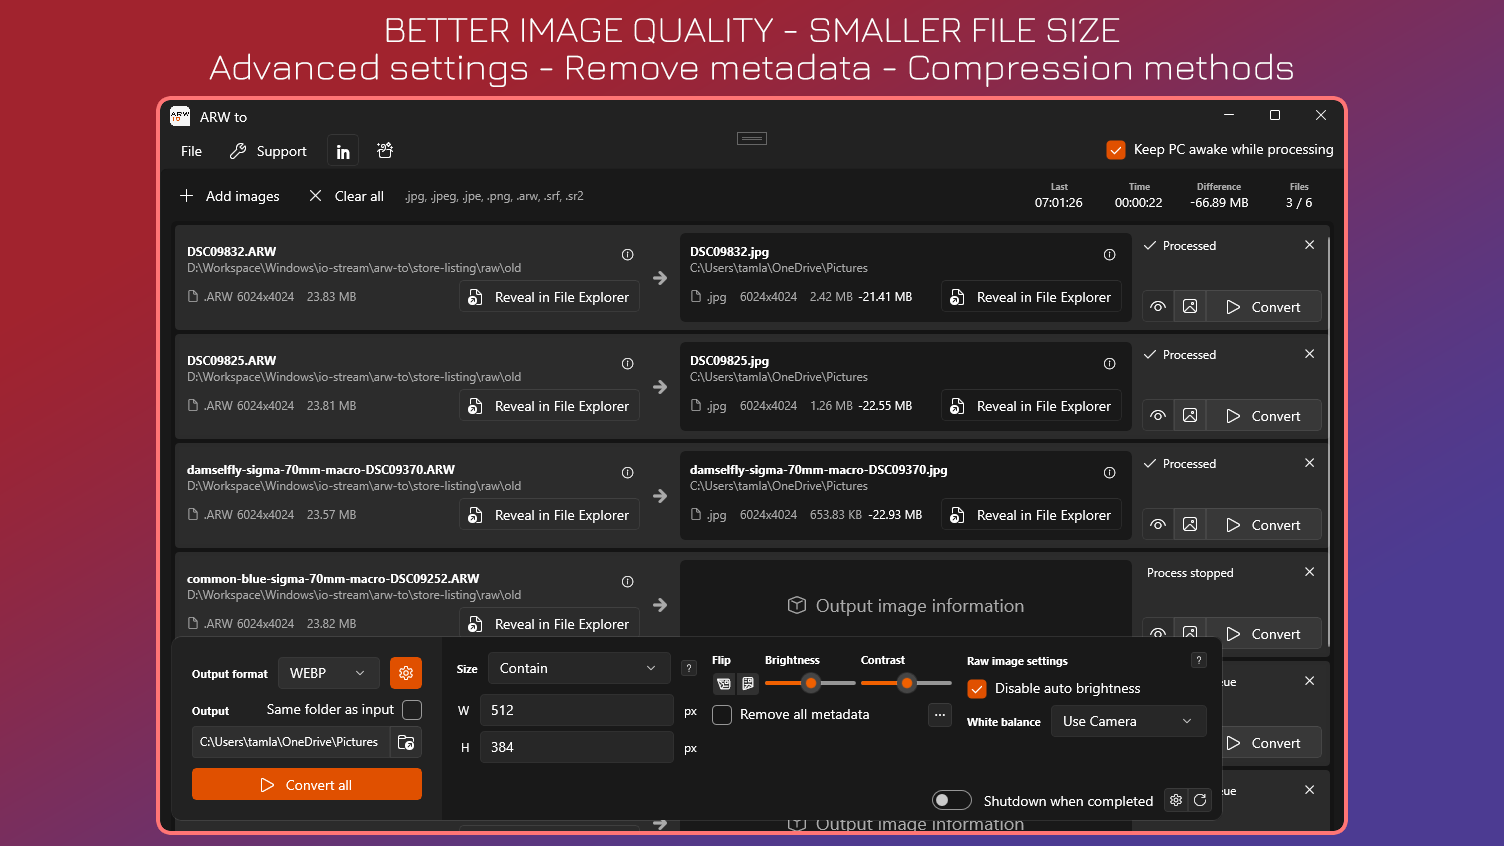 Better Image Quality, Smaller File Size - Advanced settings - Remove metadata - More compression method.